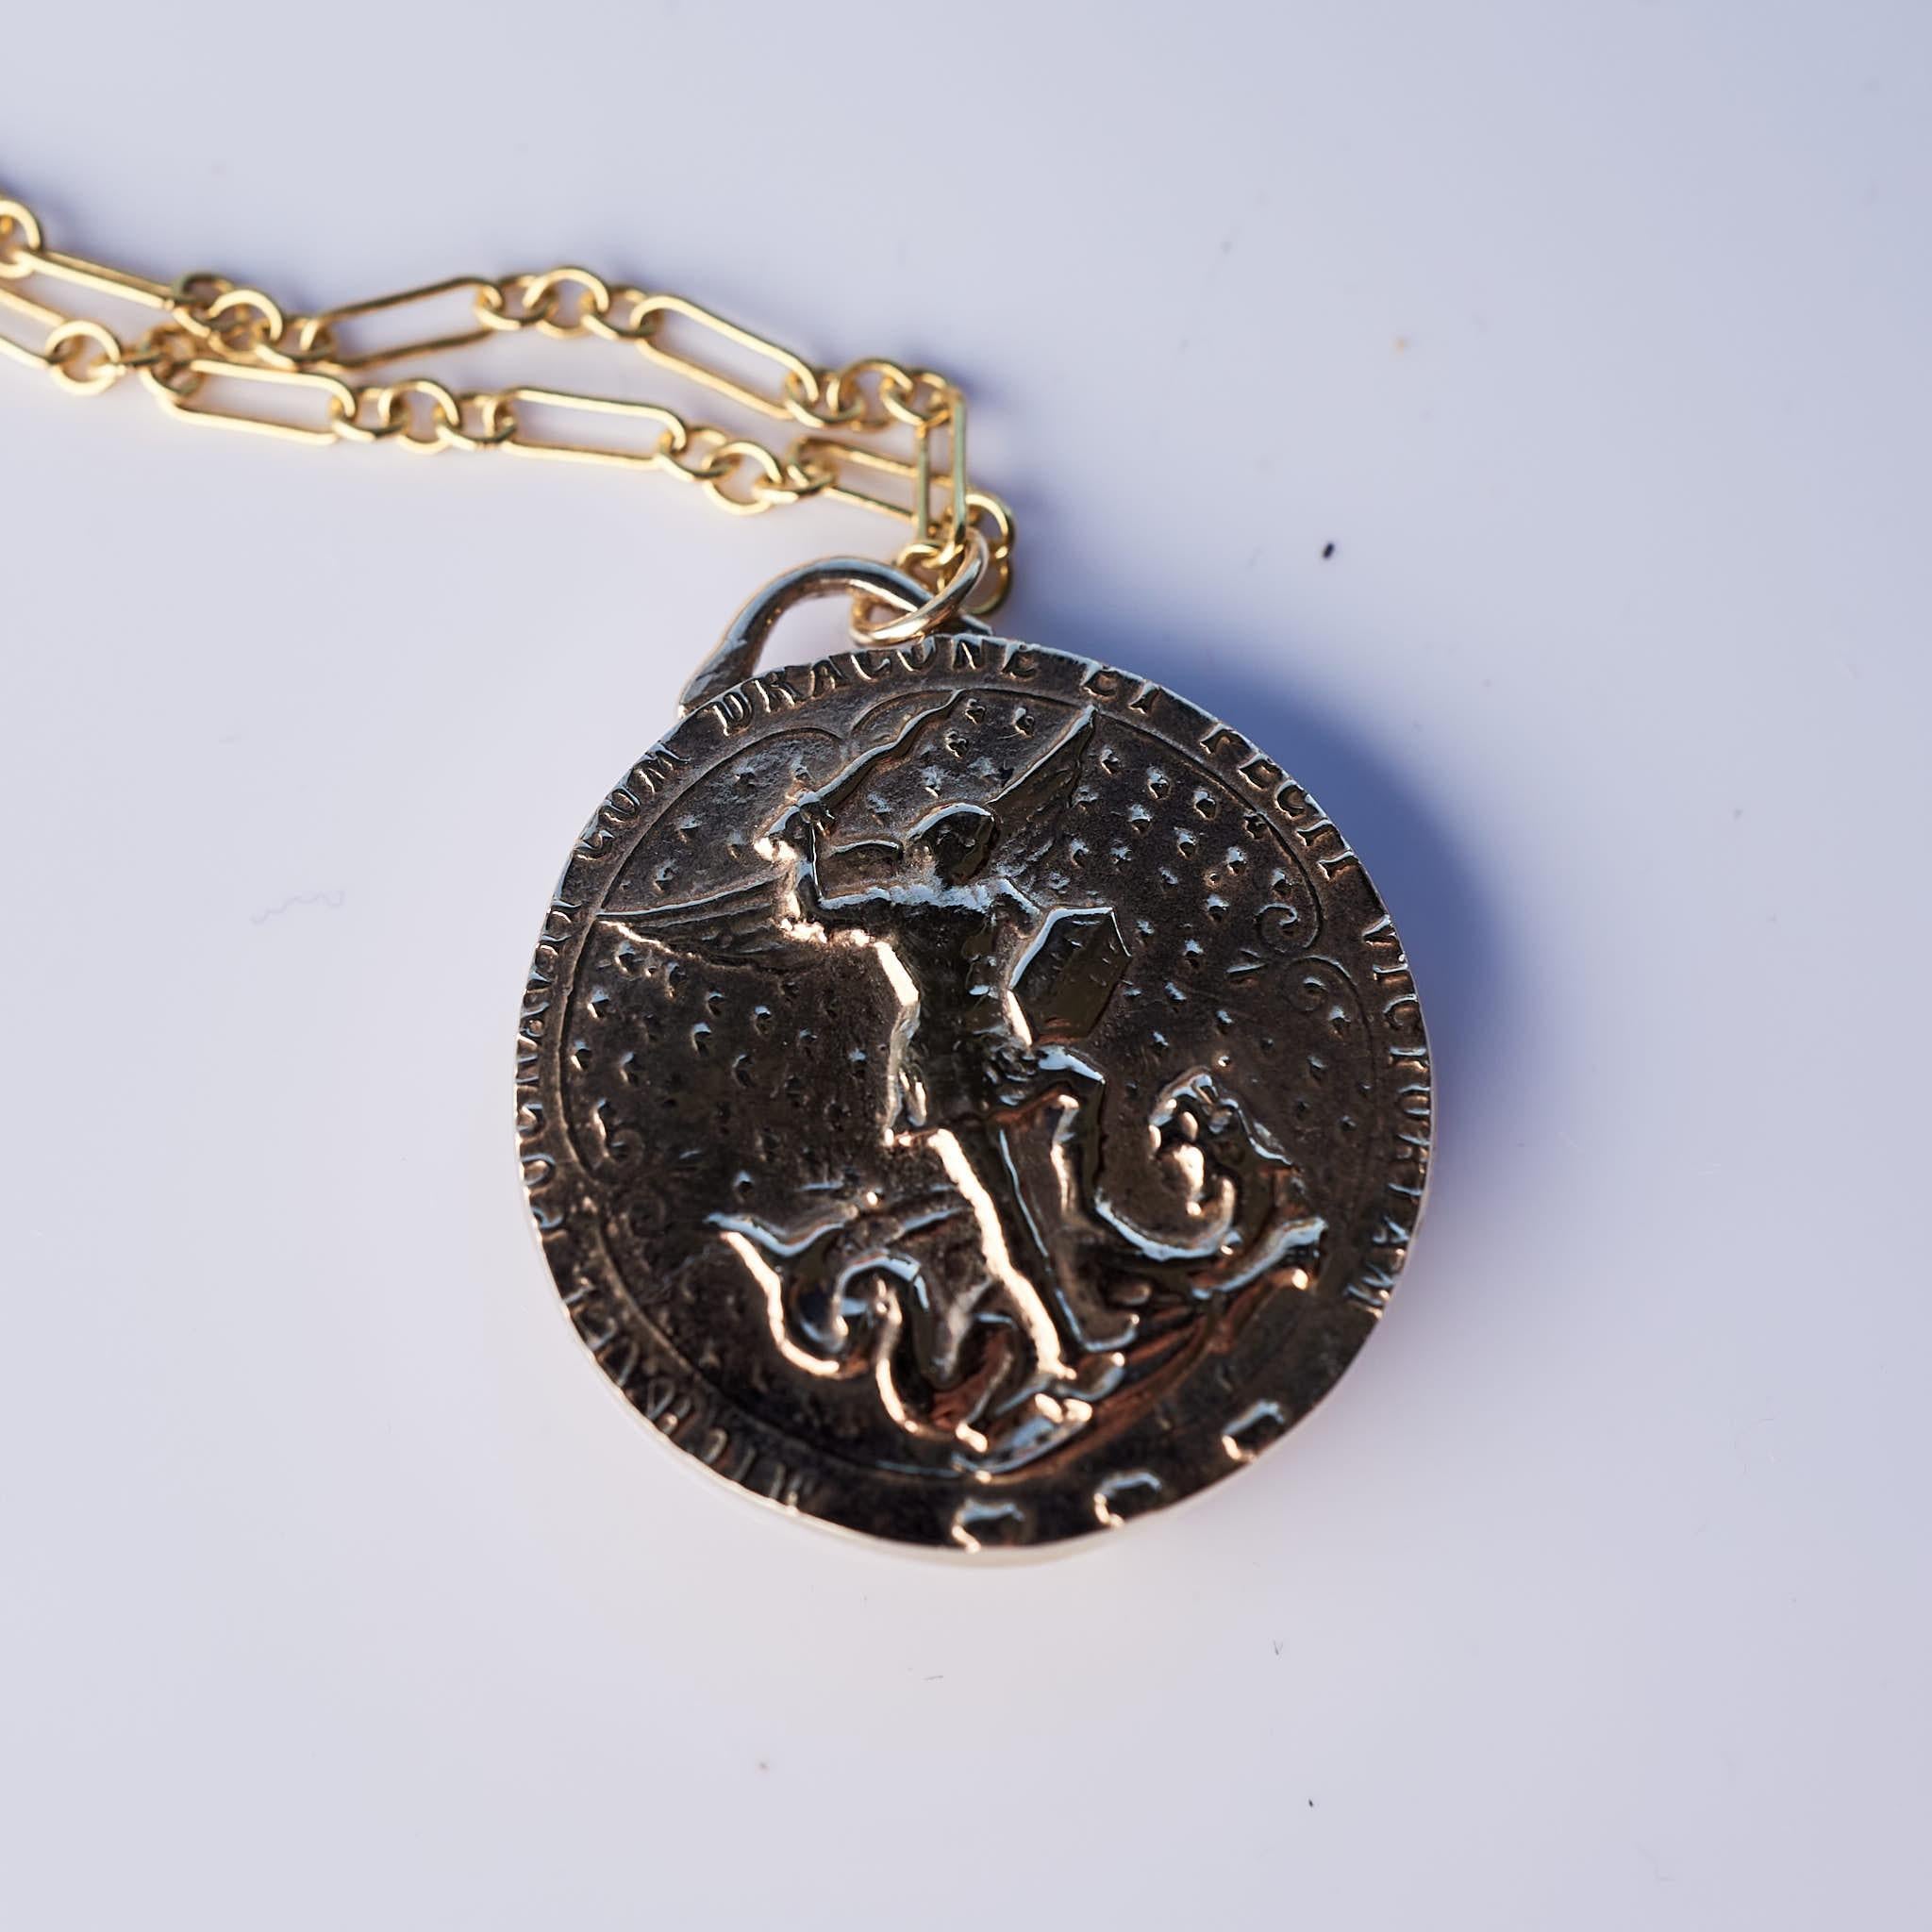 Brilliant Cut White Diamond Medal Coin Pendant Chain Necklace Joan of Arc J Dauphin For Sale